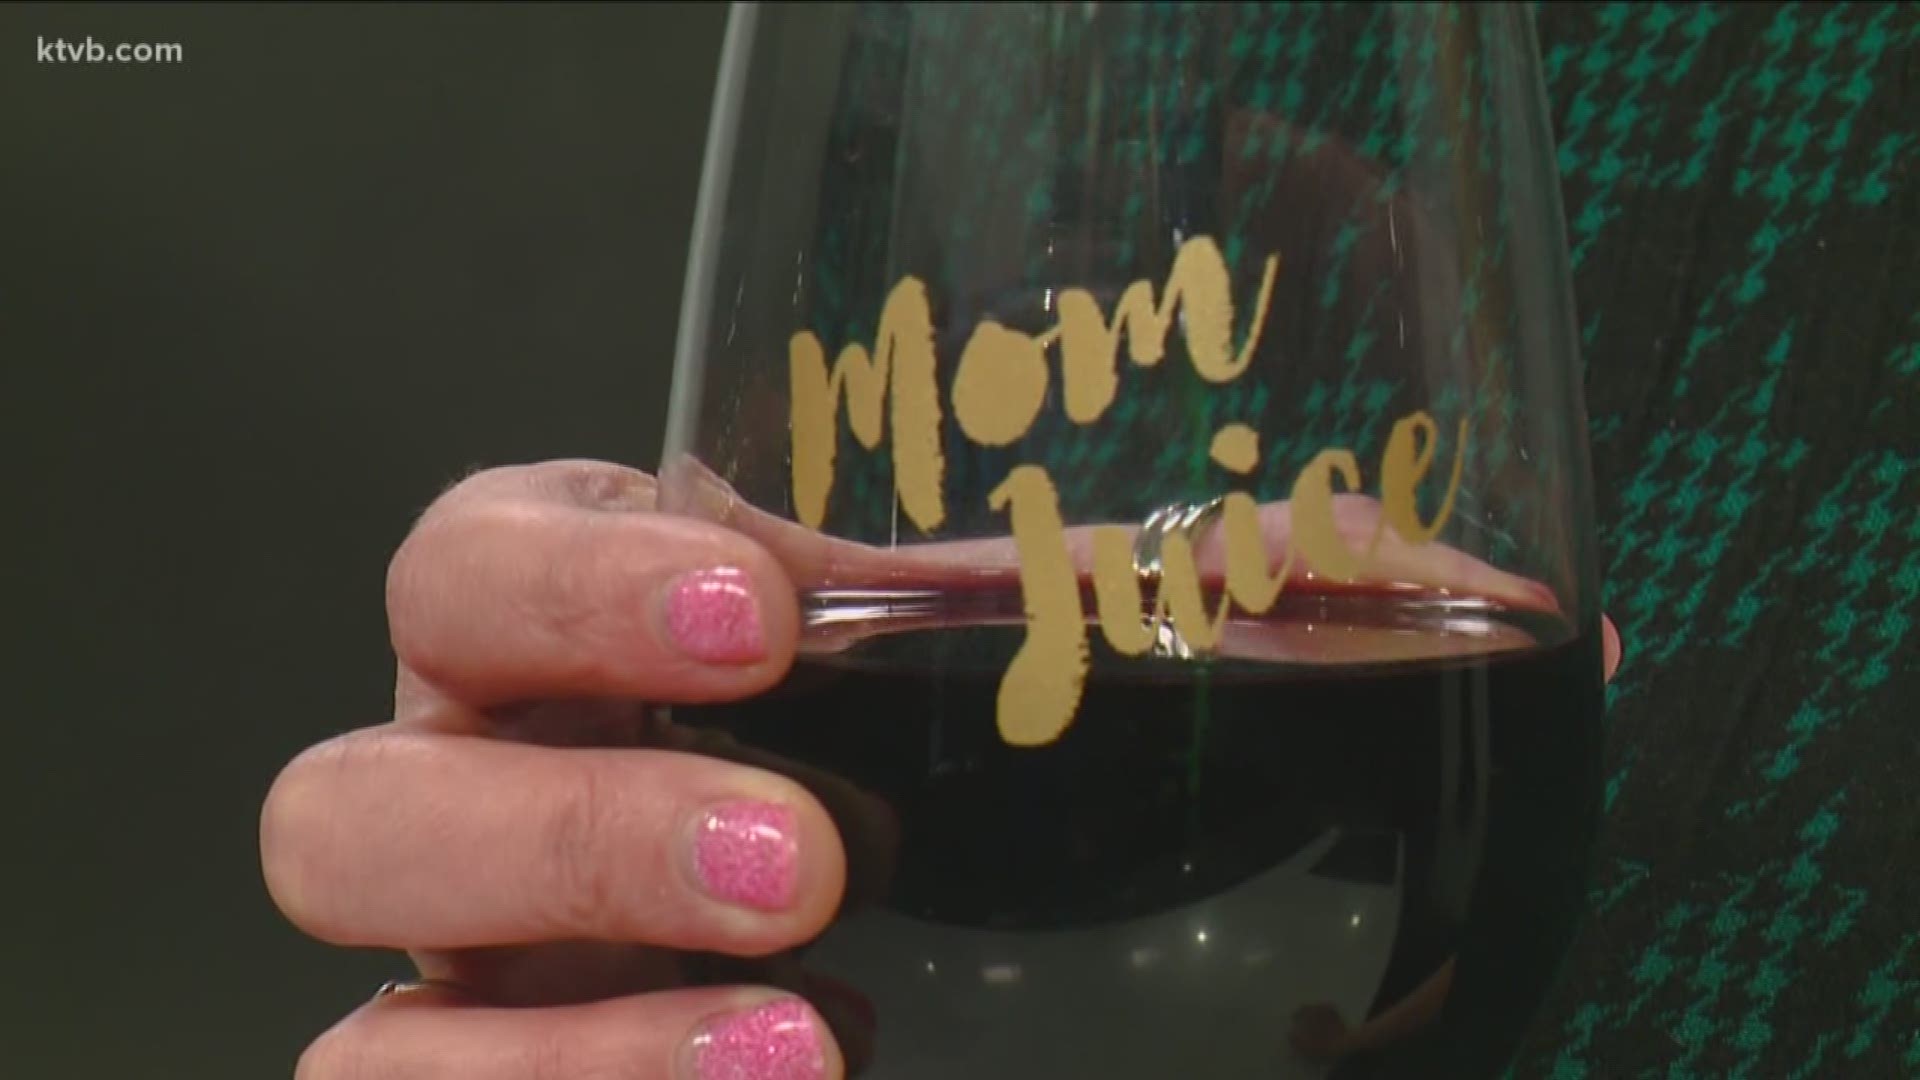 The Meridan mom says wine helped her relax, but she realized it was getting 'too intense'.